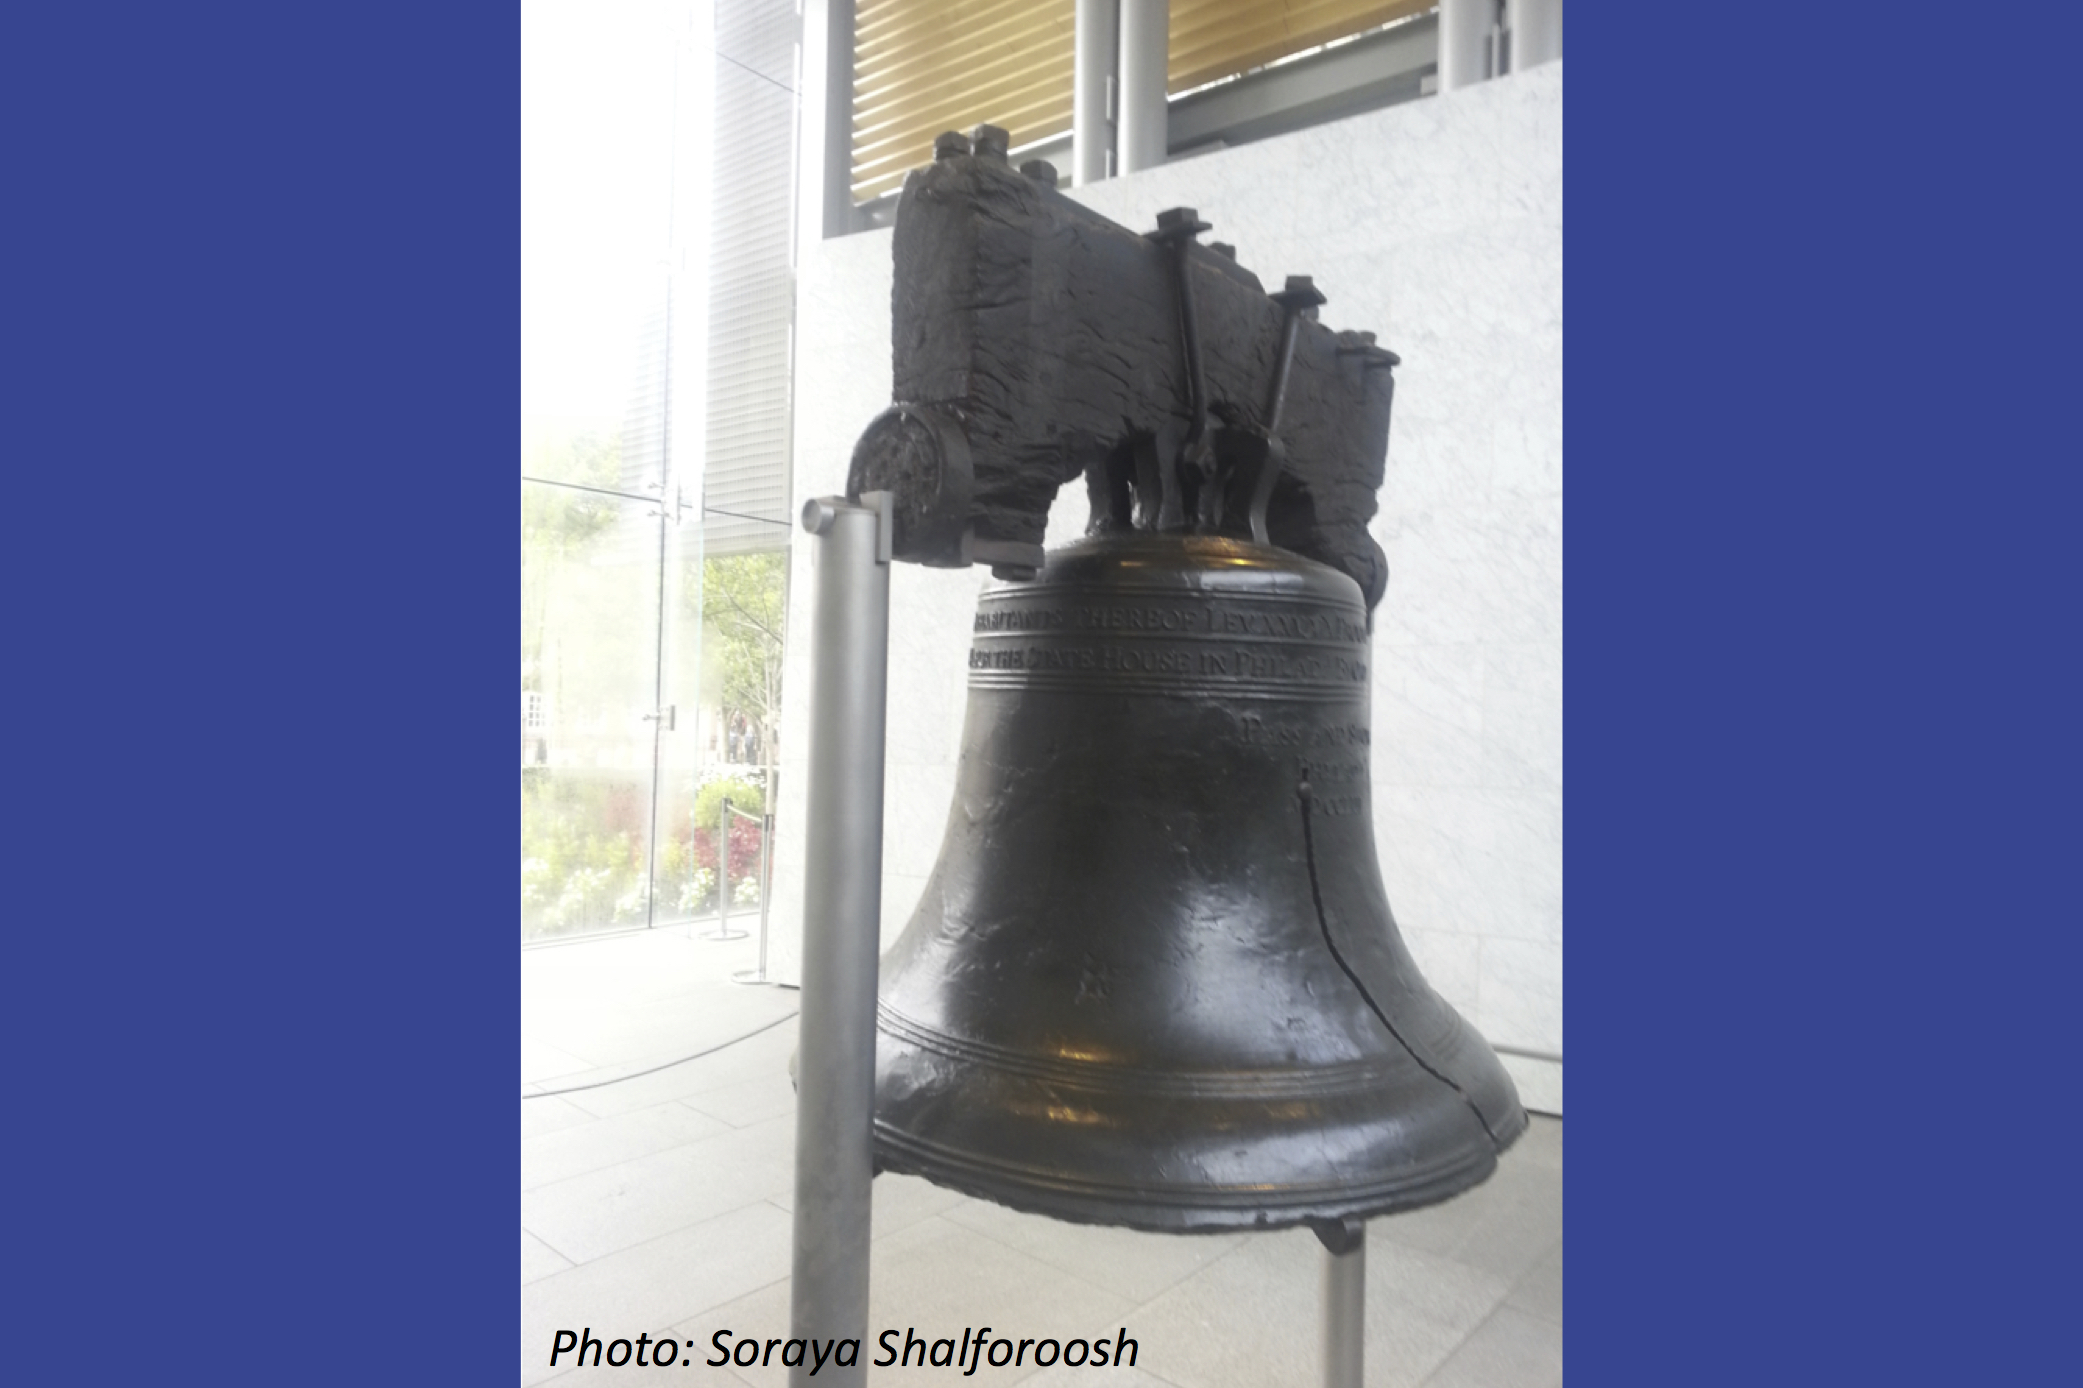 how many liberty bells have there been